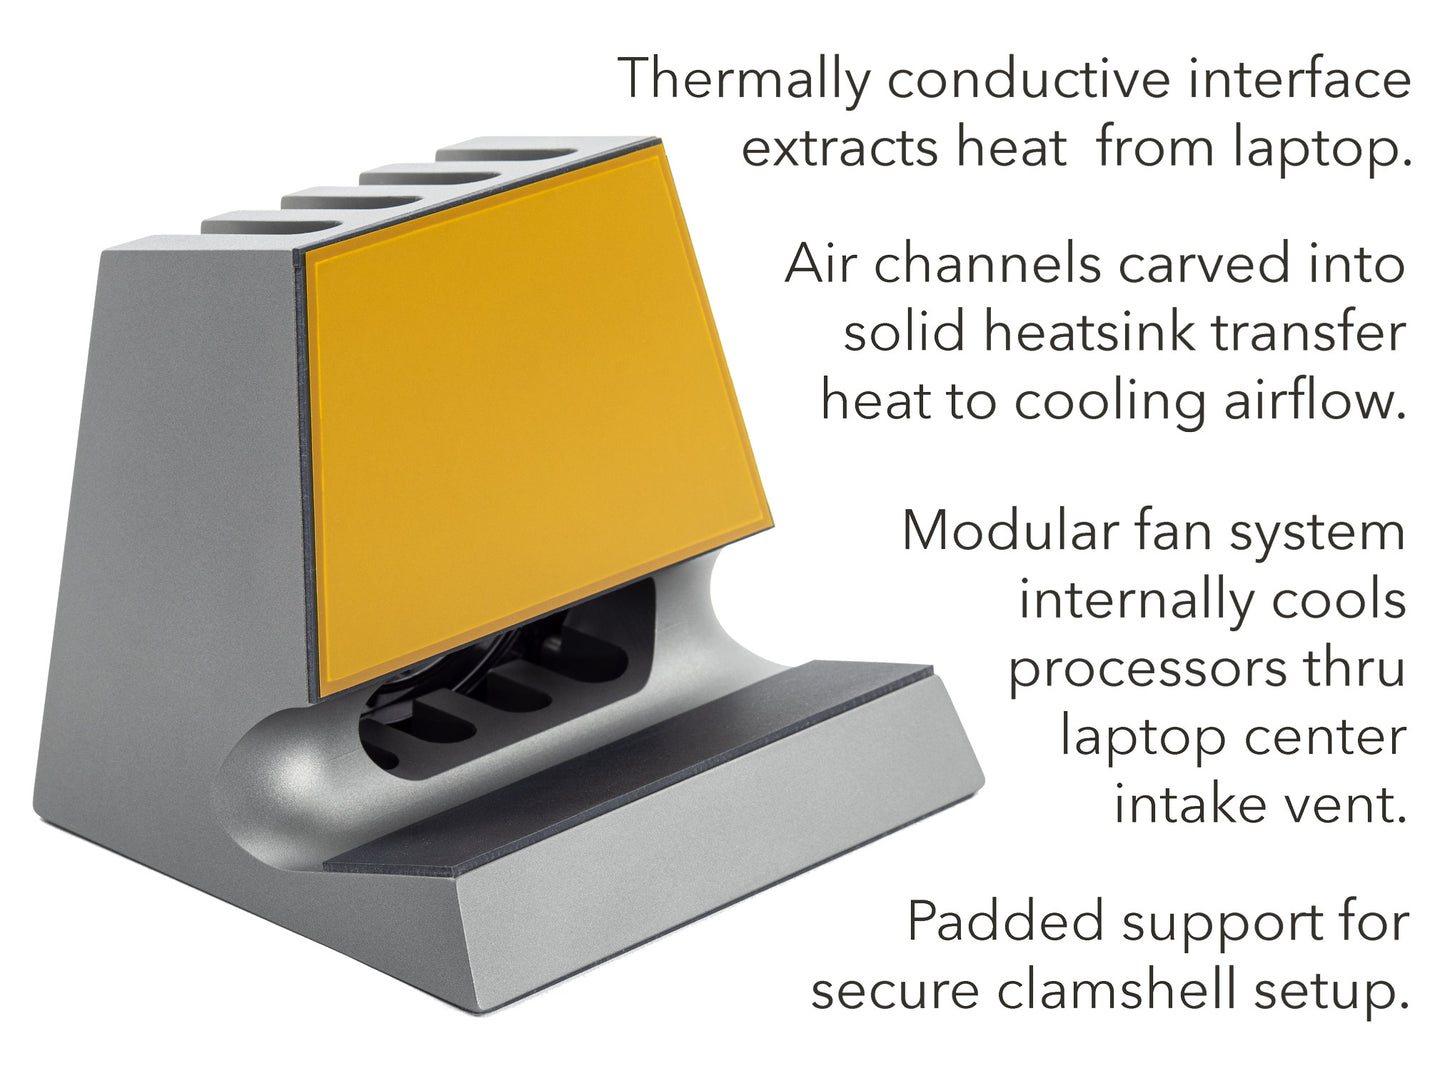 SVALT Cooling Dock model DHCx gray front view thermal overlay for quiet active airflow and thermally conductive heatsink cooling performance with Apple laptop 2021-2023 M1 Max 16-inch MacBook Pro, with labels describing cooling